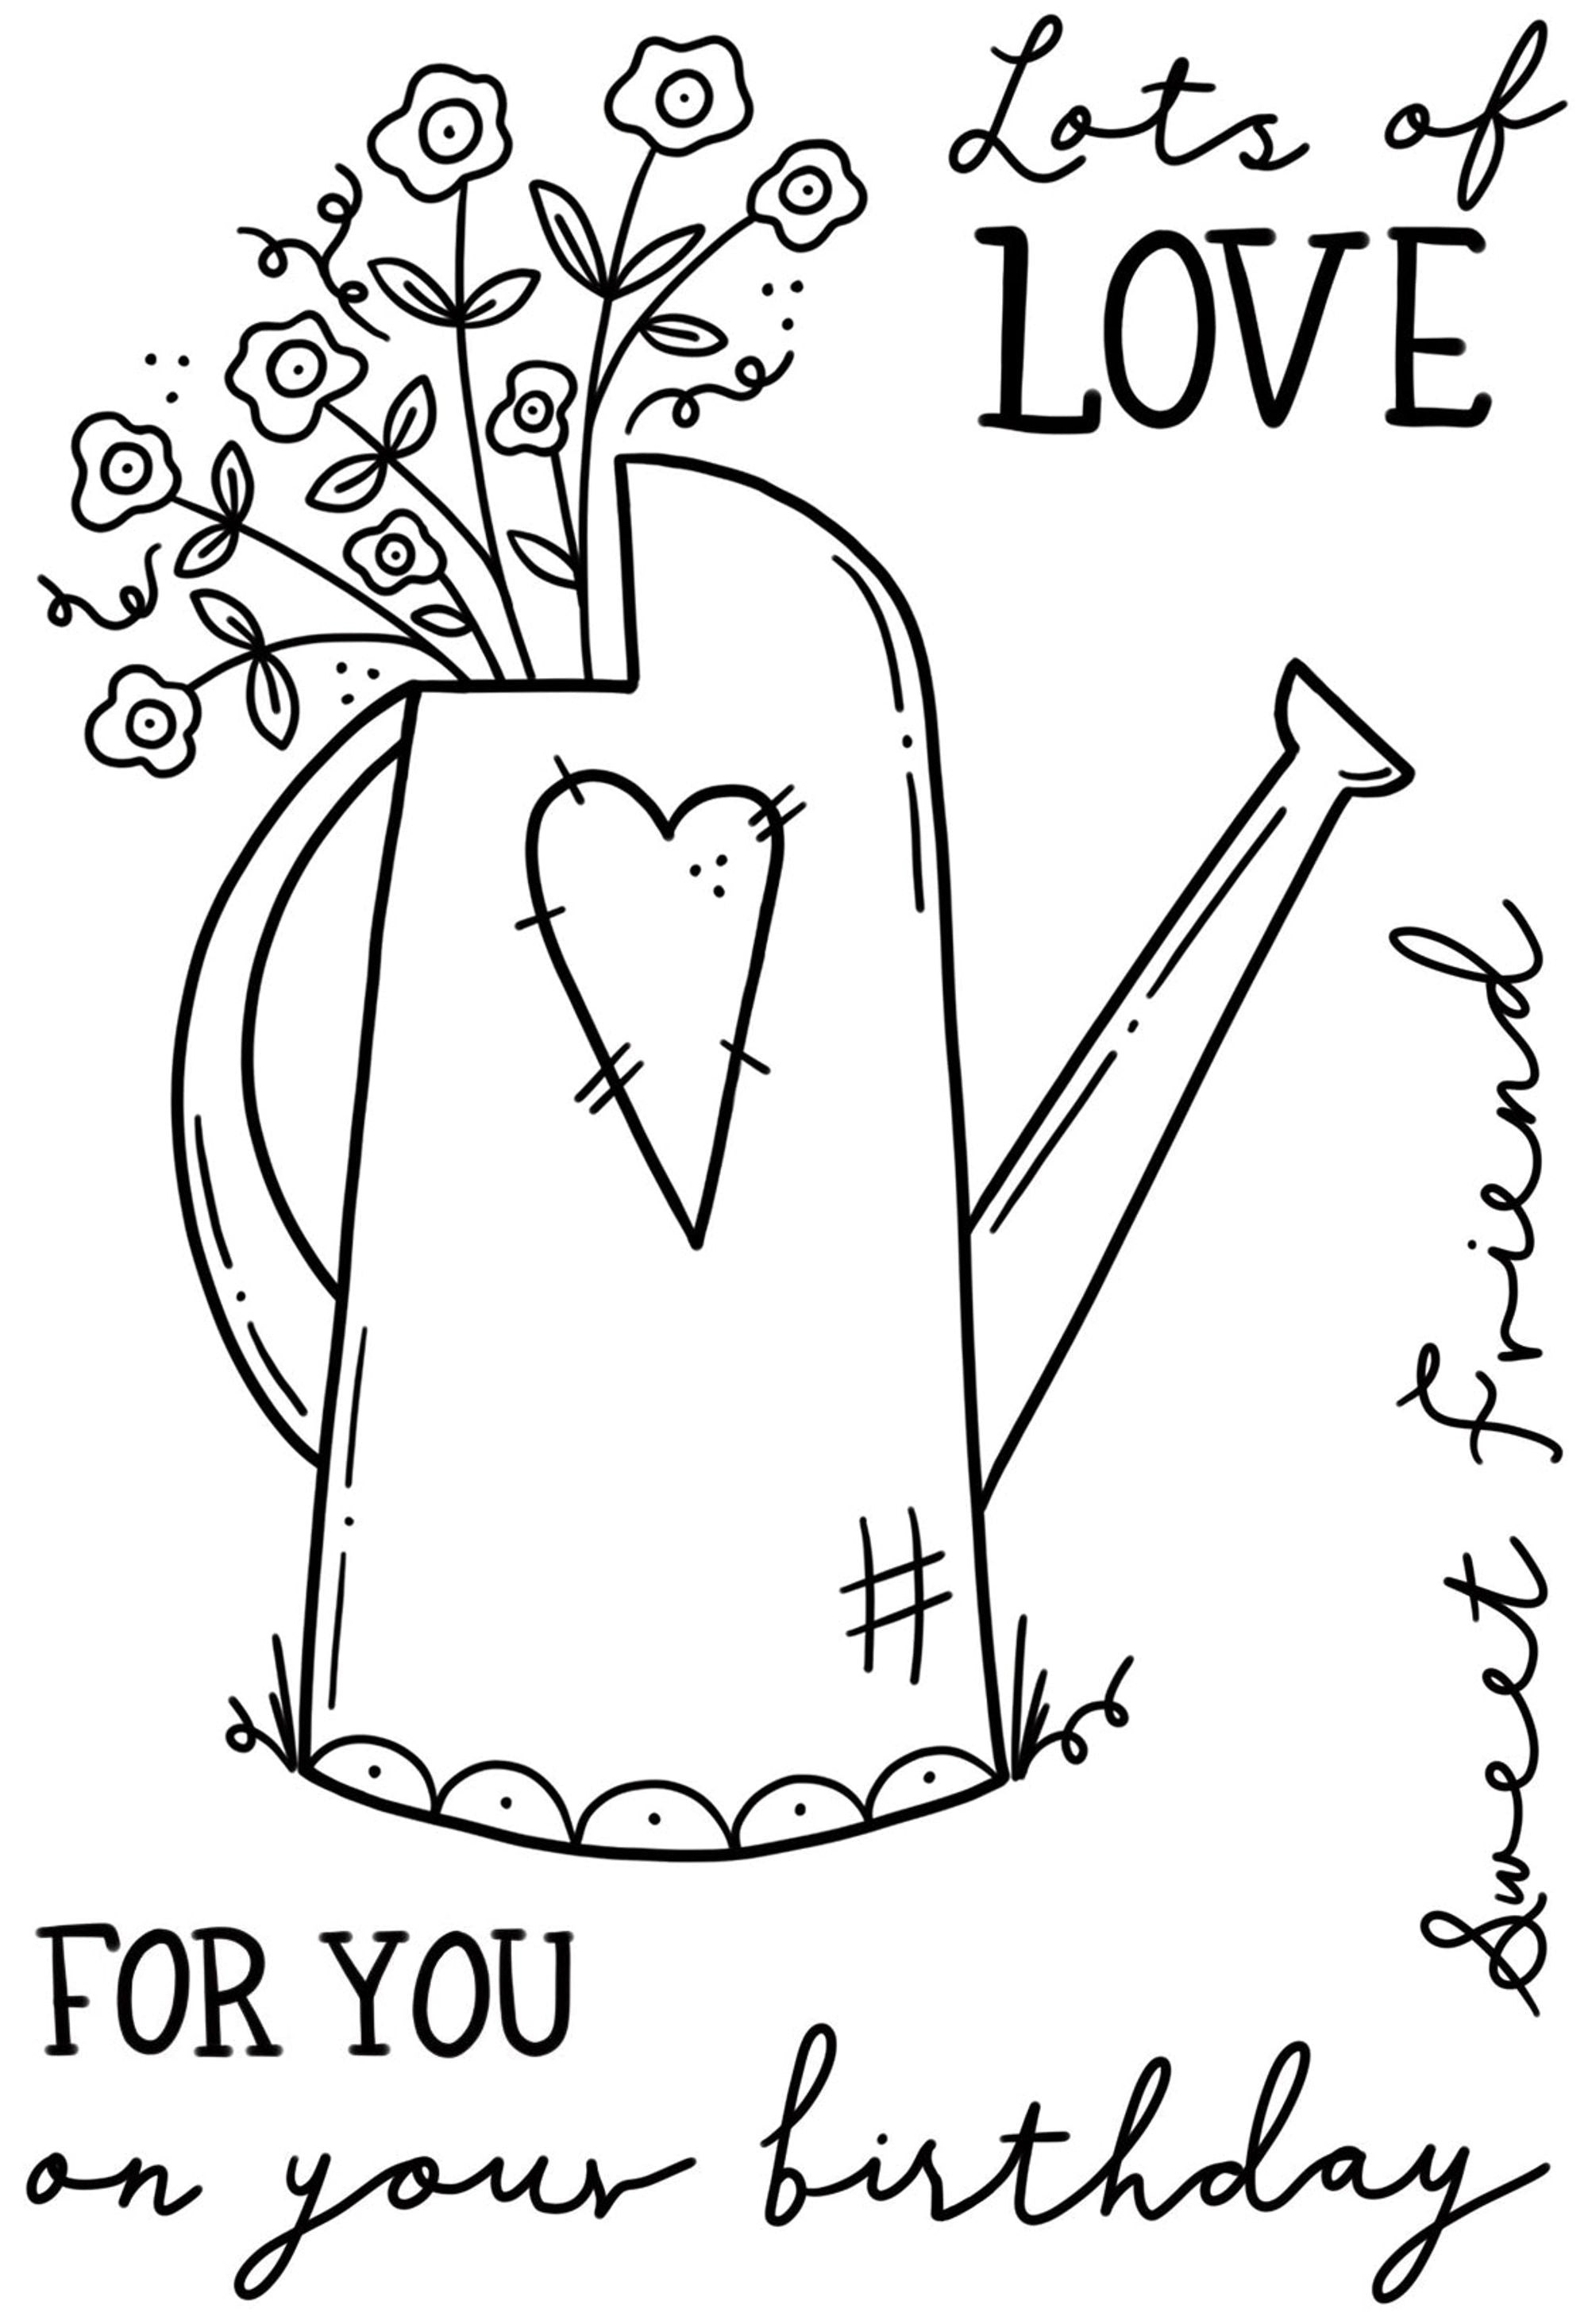 Creative Expressions Sam Poole Friendship Watering Can 6 in x 4 in Clear Stamp Set